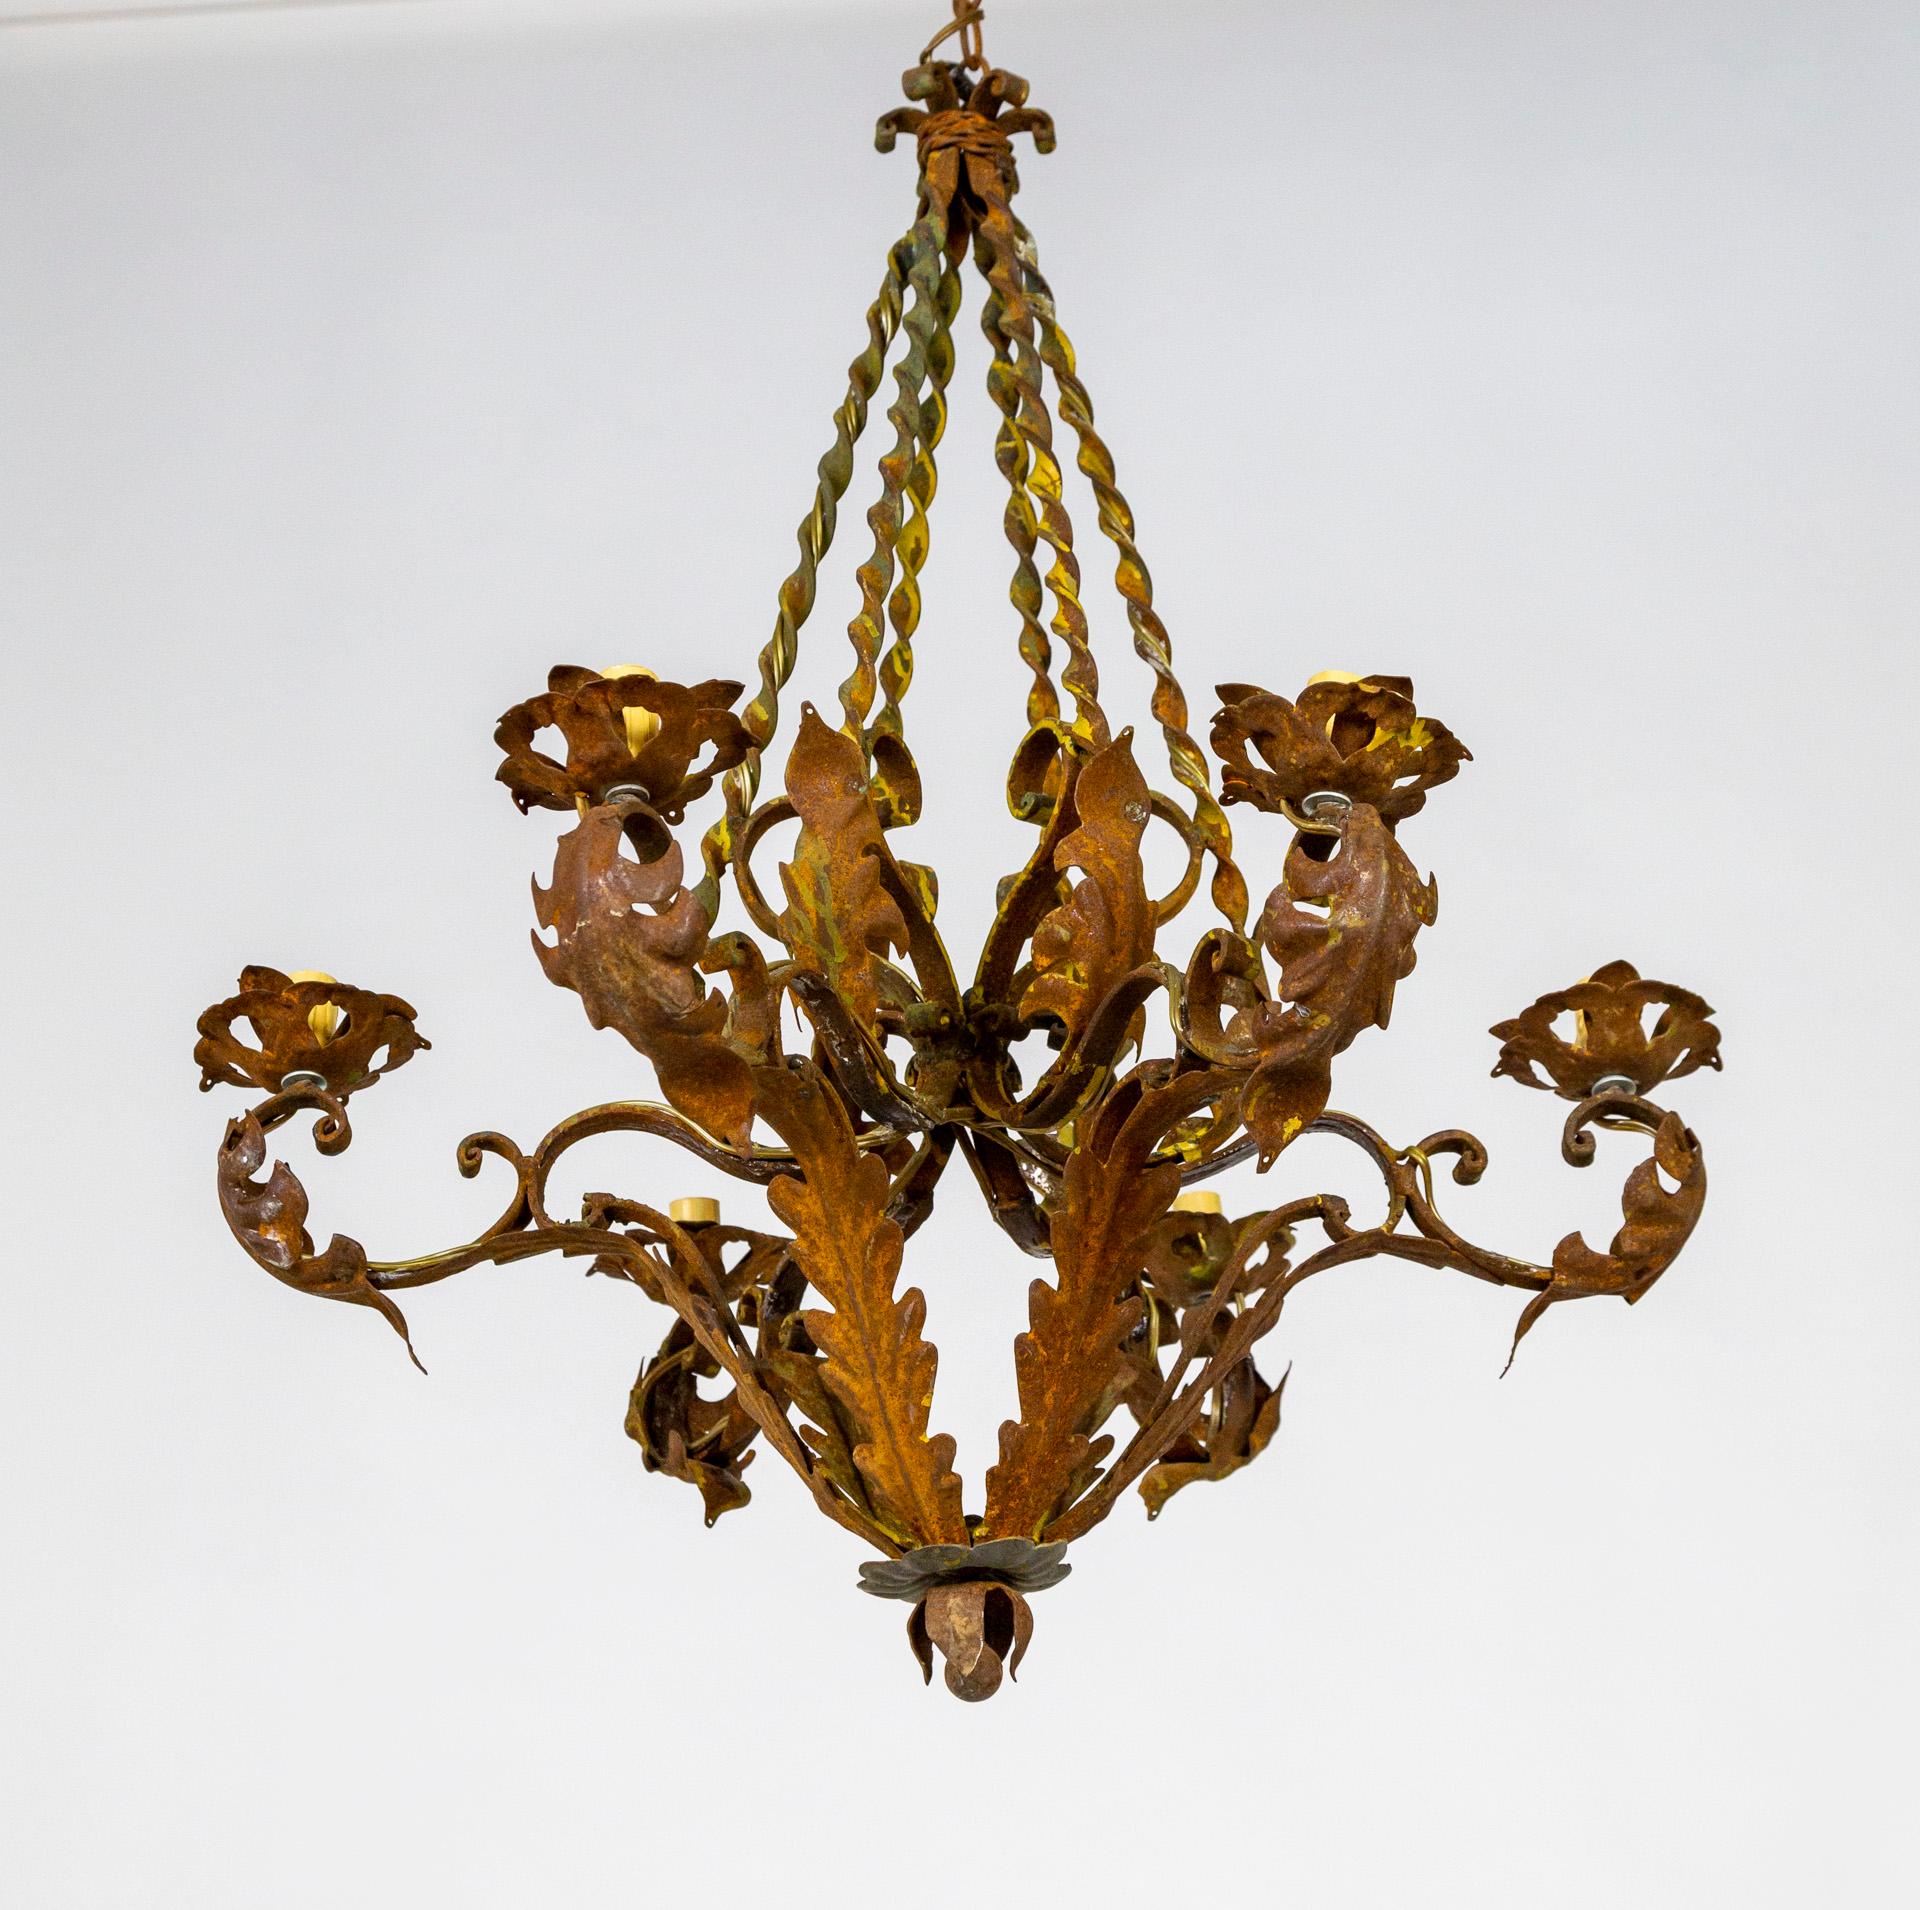 A 6-light chandelier with a diamond-shaped structure comprised of four twisted metal stems, C-curves, and curling leaves. The metal has a unique patina of rust and touches of yellow ochre and olive green paint. Newly wired. Chain length variable.